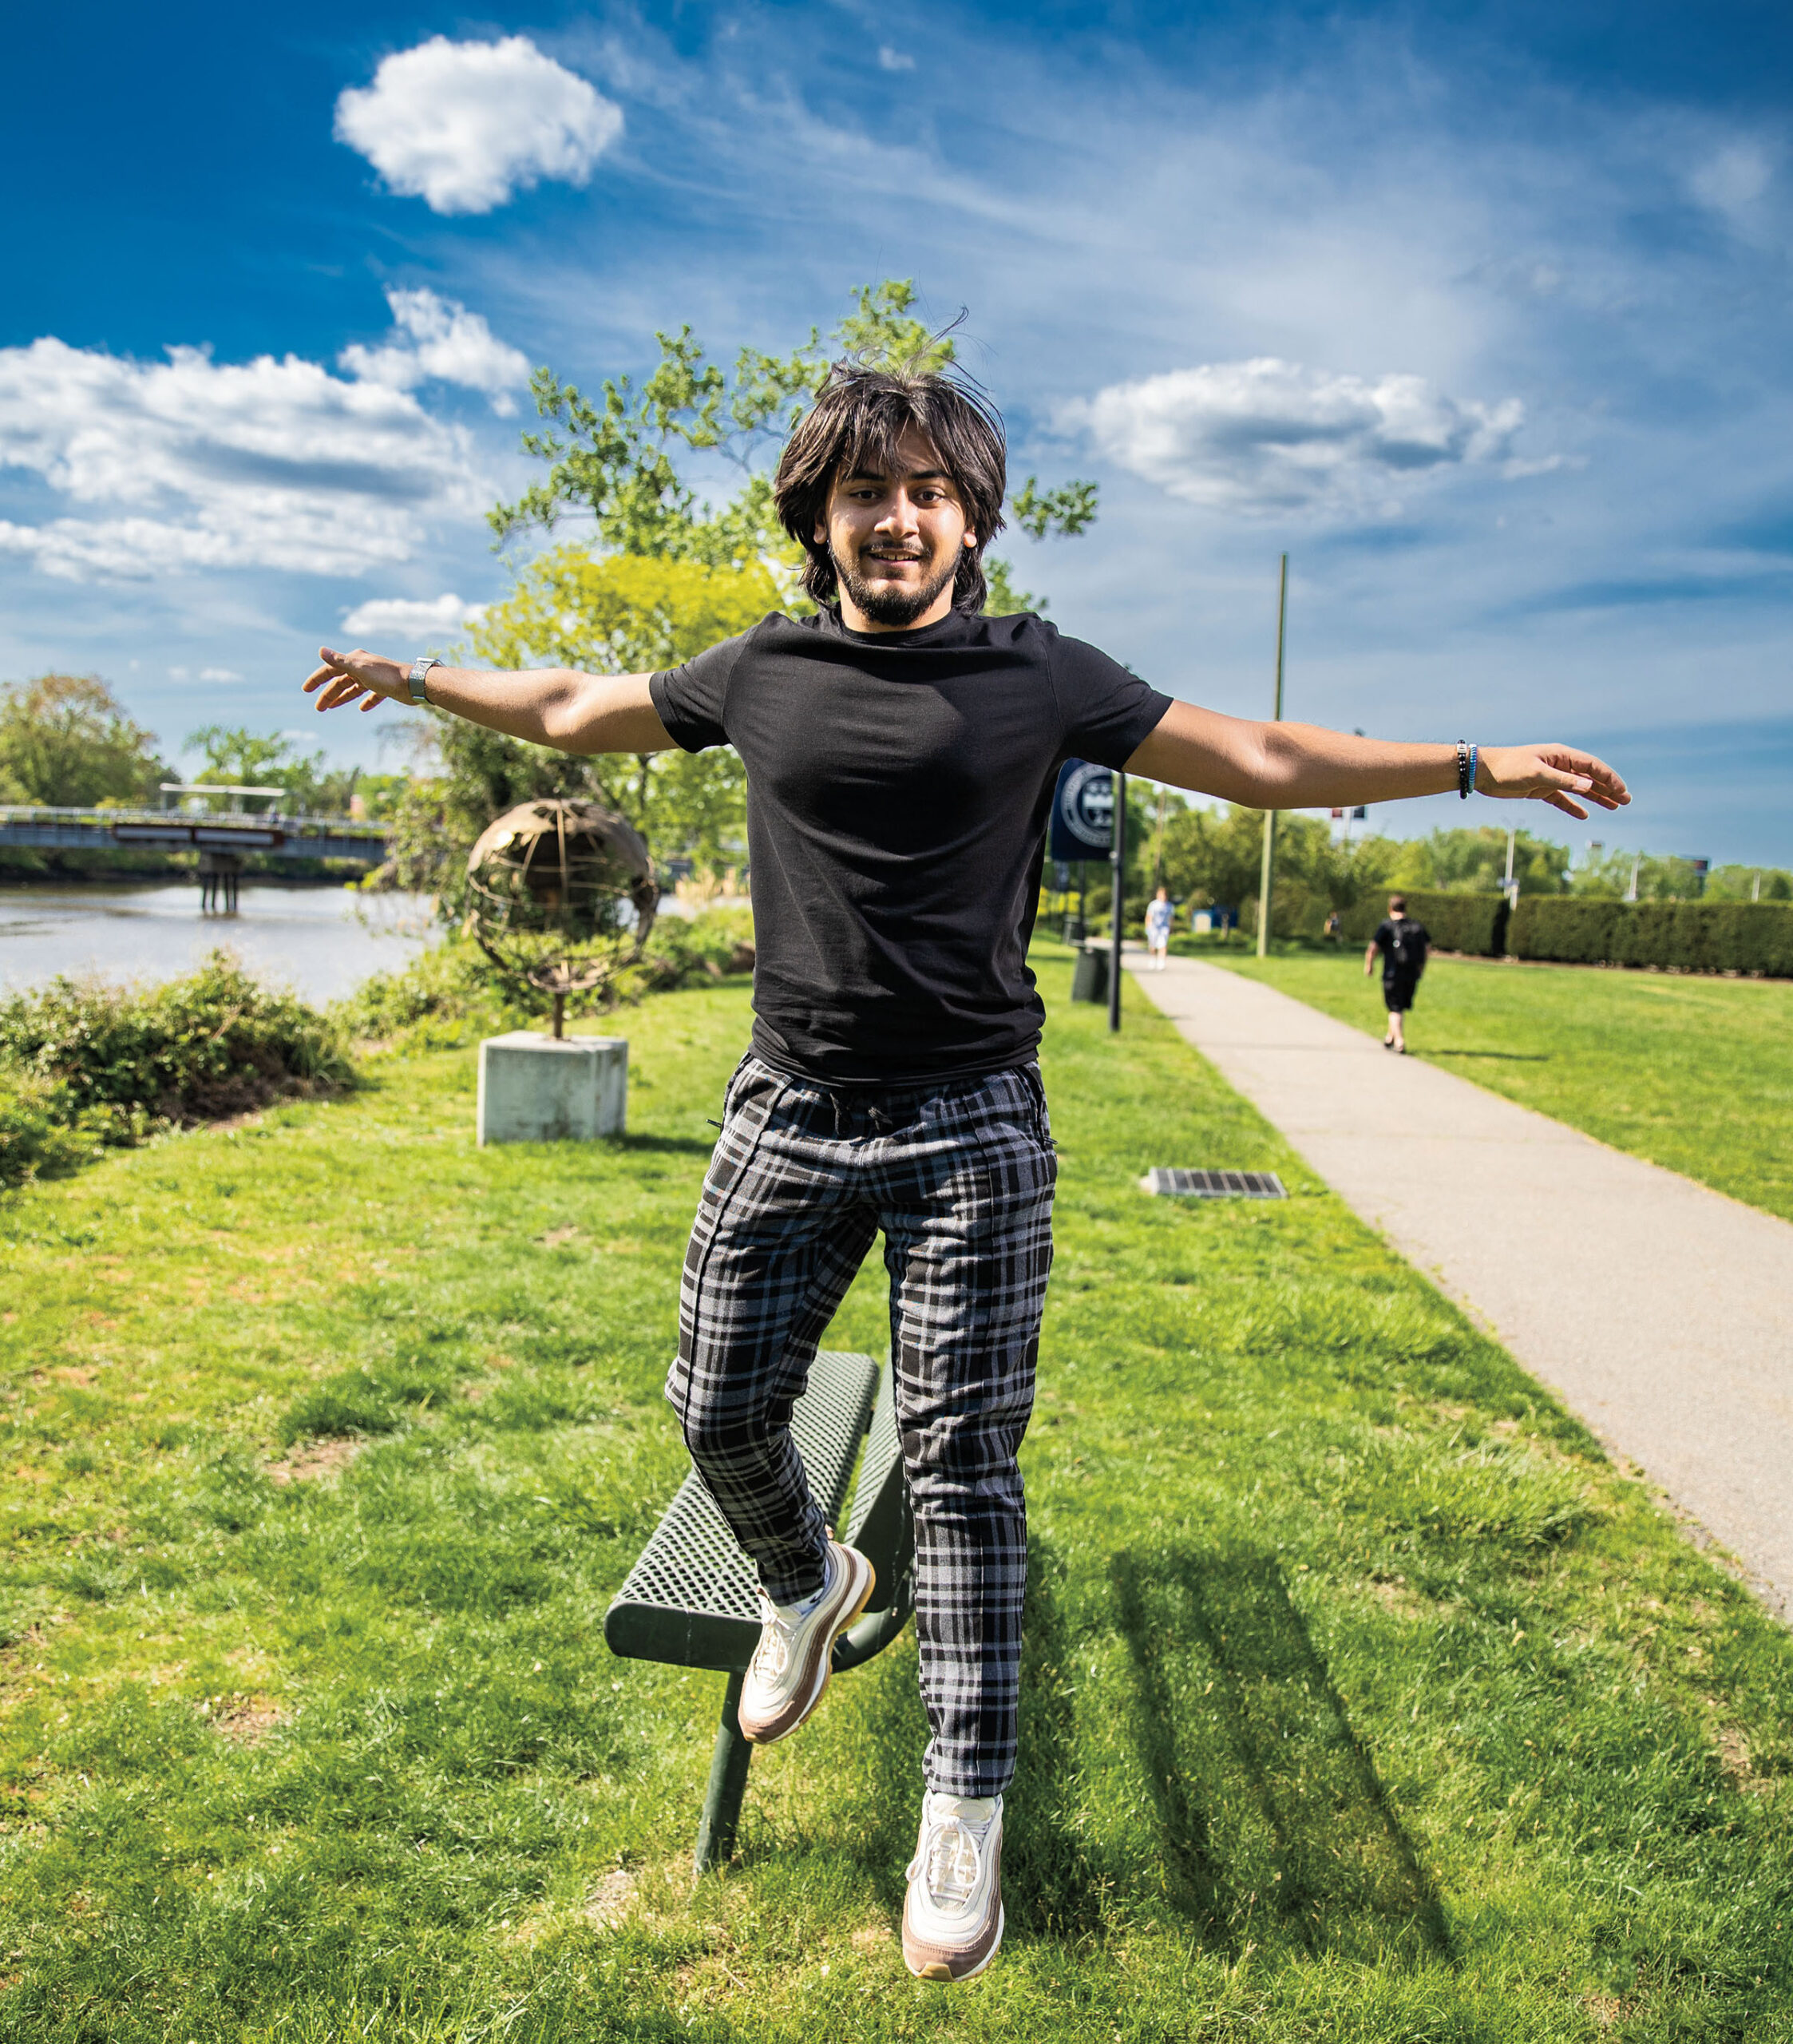 A young man photographed in mid-air, jumping off an outdoor bench in the grass on campus.